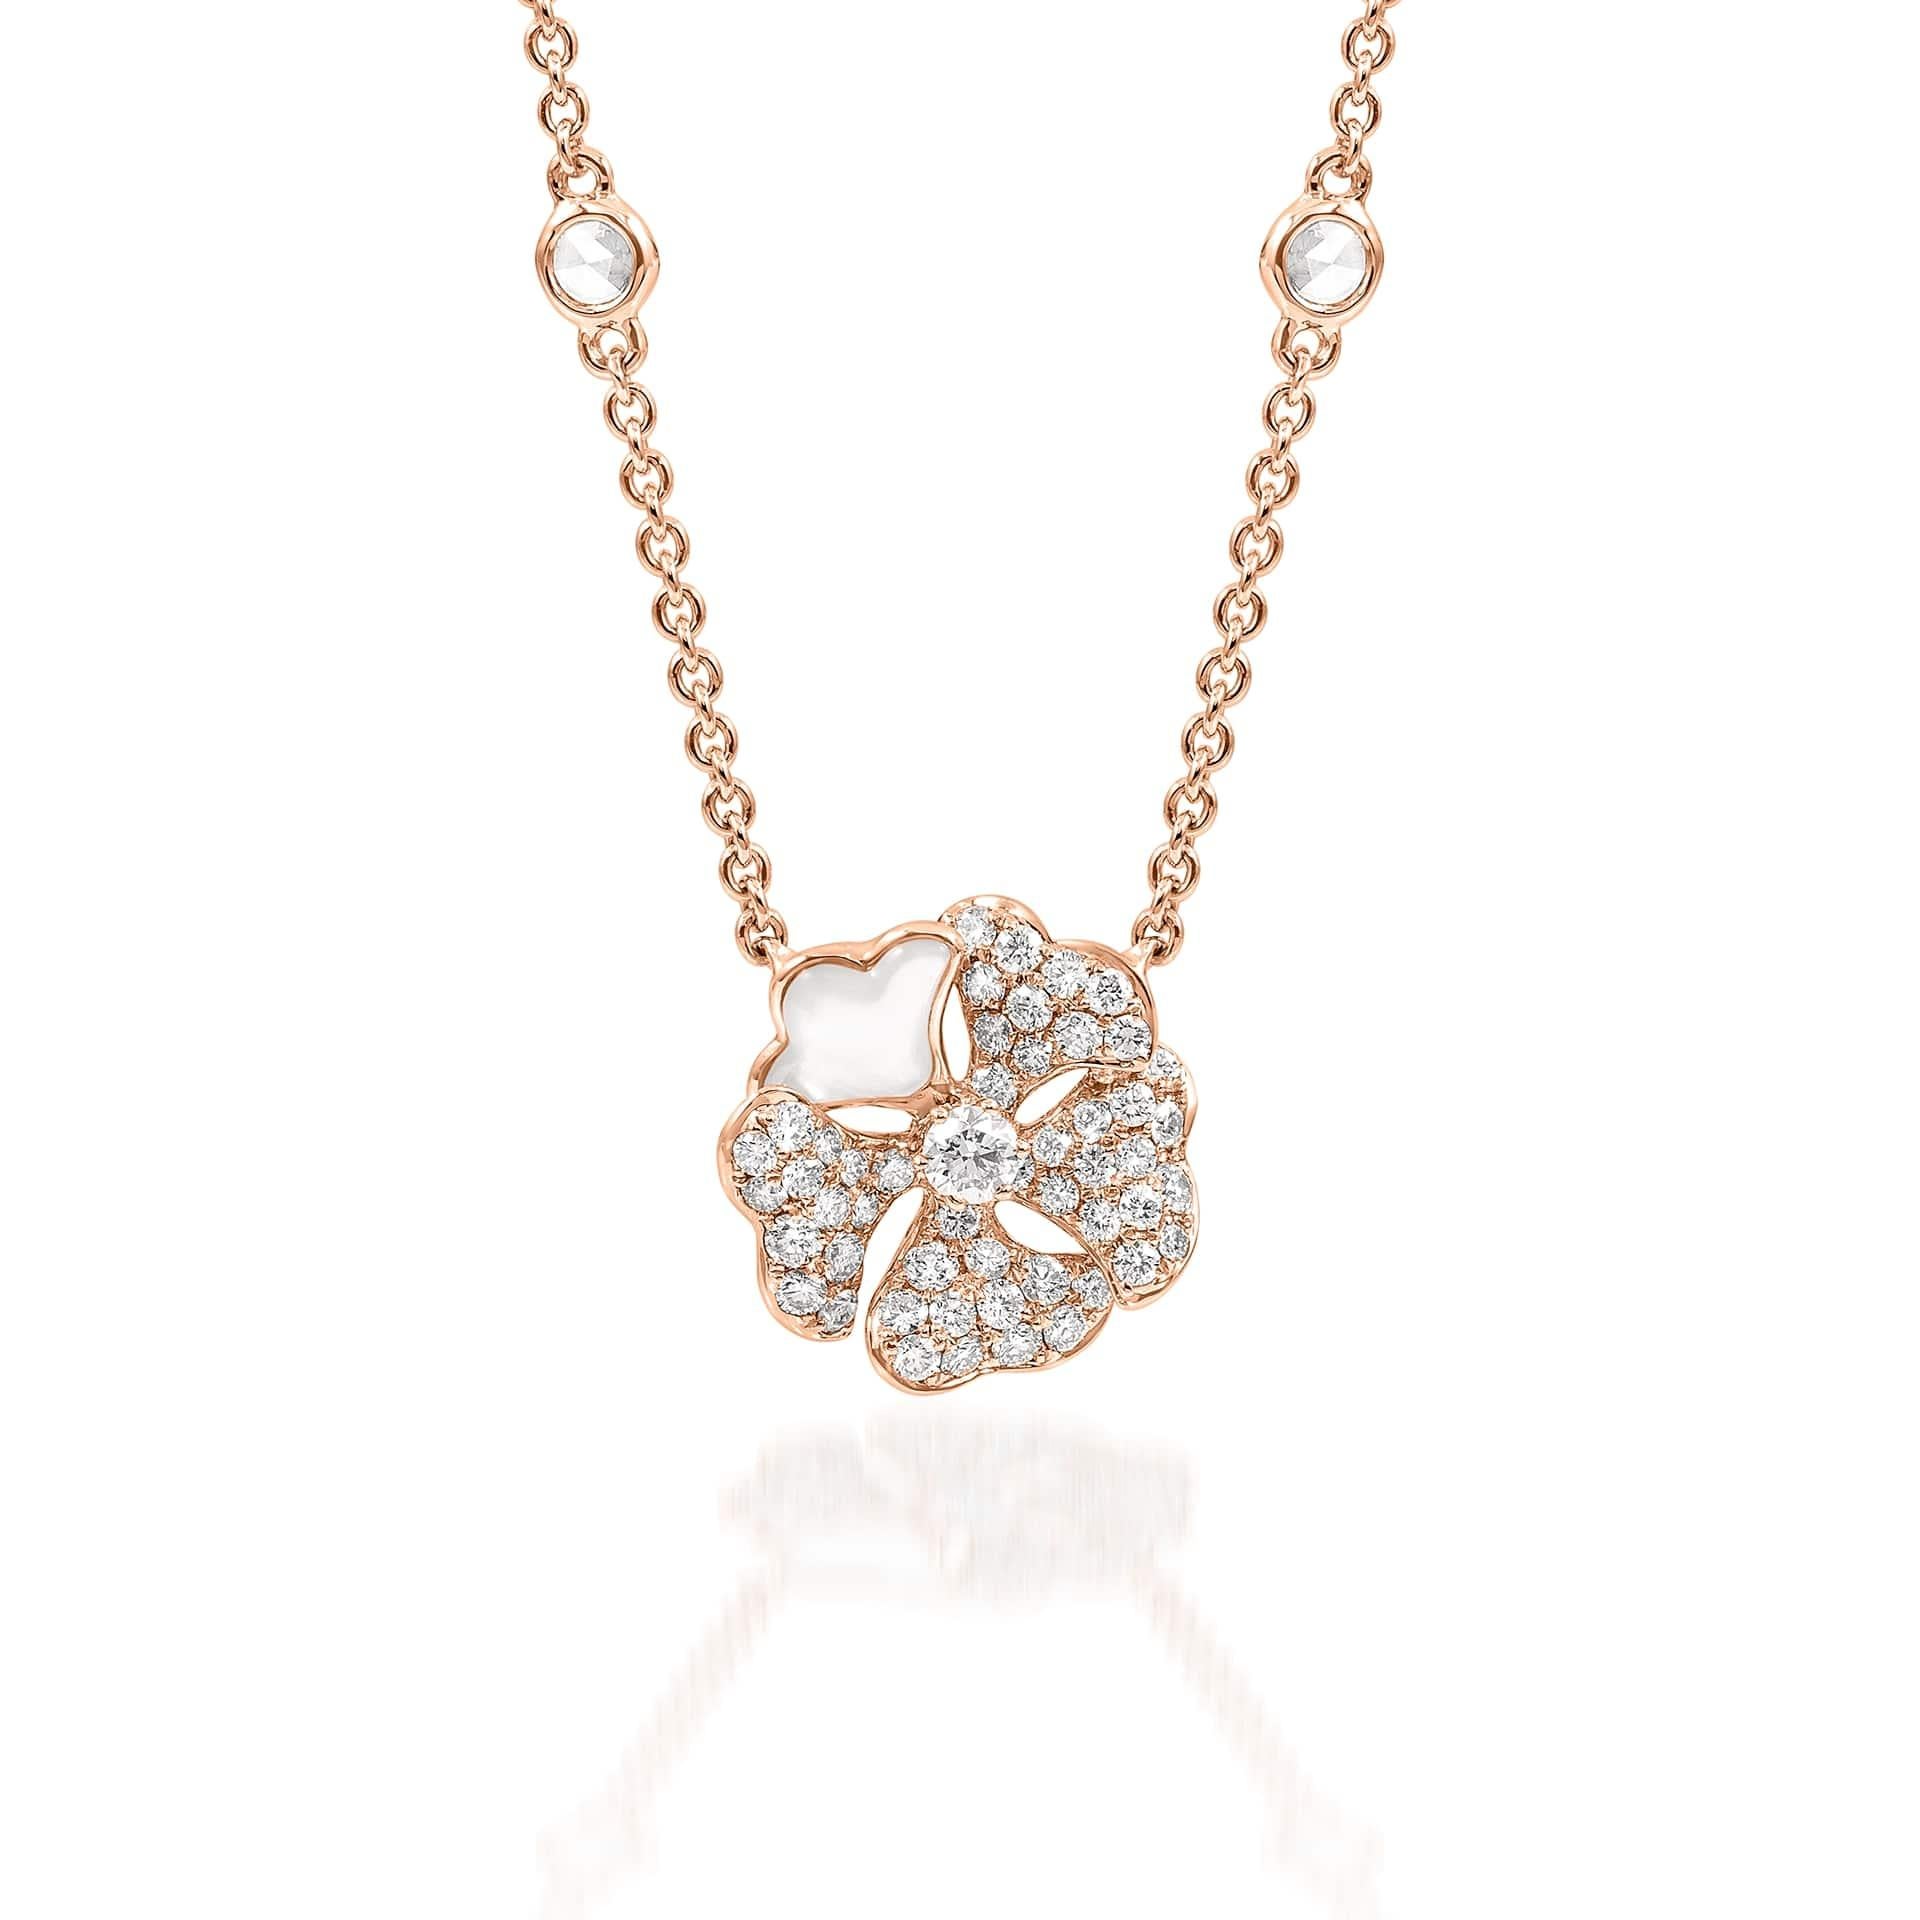 Bloom Pavé Diamond and Mother-of-Pearl Flower Necklace in 18K Rose Gold

Inspired by the exquisite petals of the alpine cinquefoil flower, the Bloom collection combines the richness of diamonds and precious metals with the light versatility of this